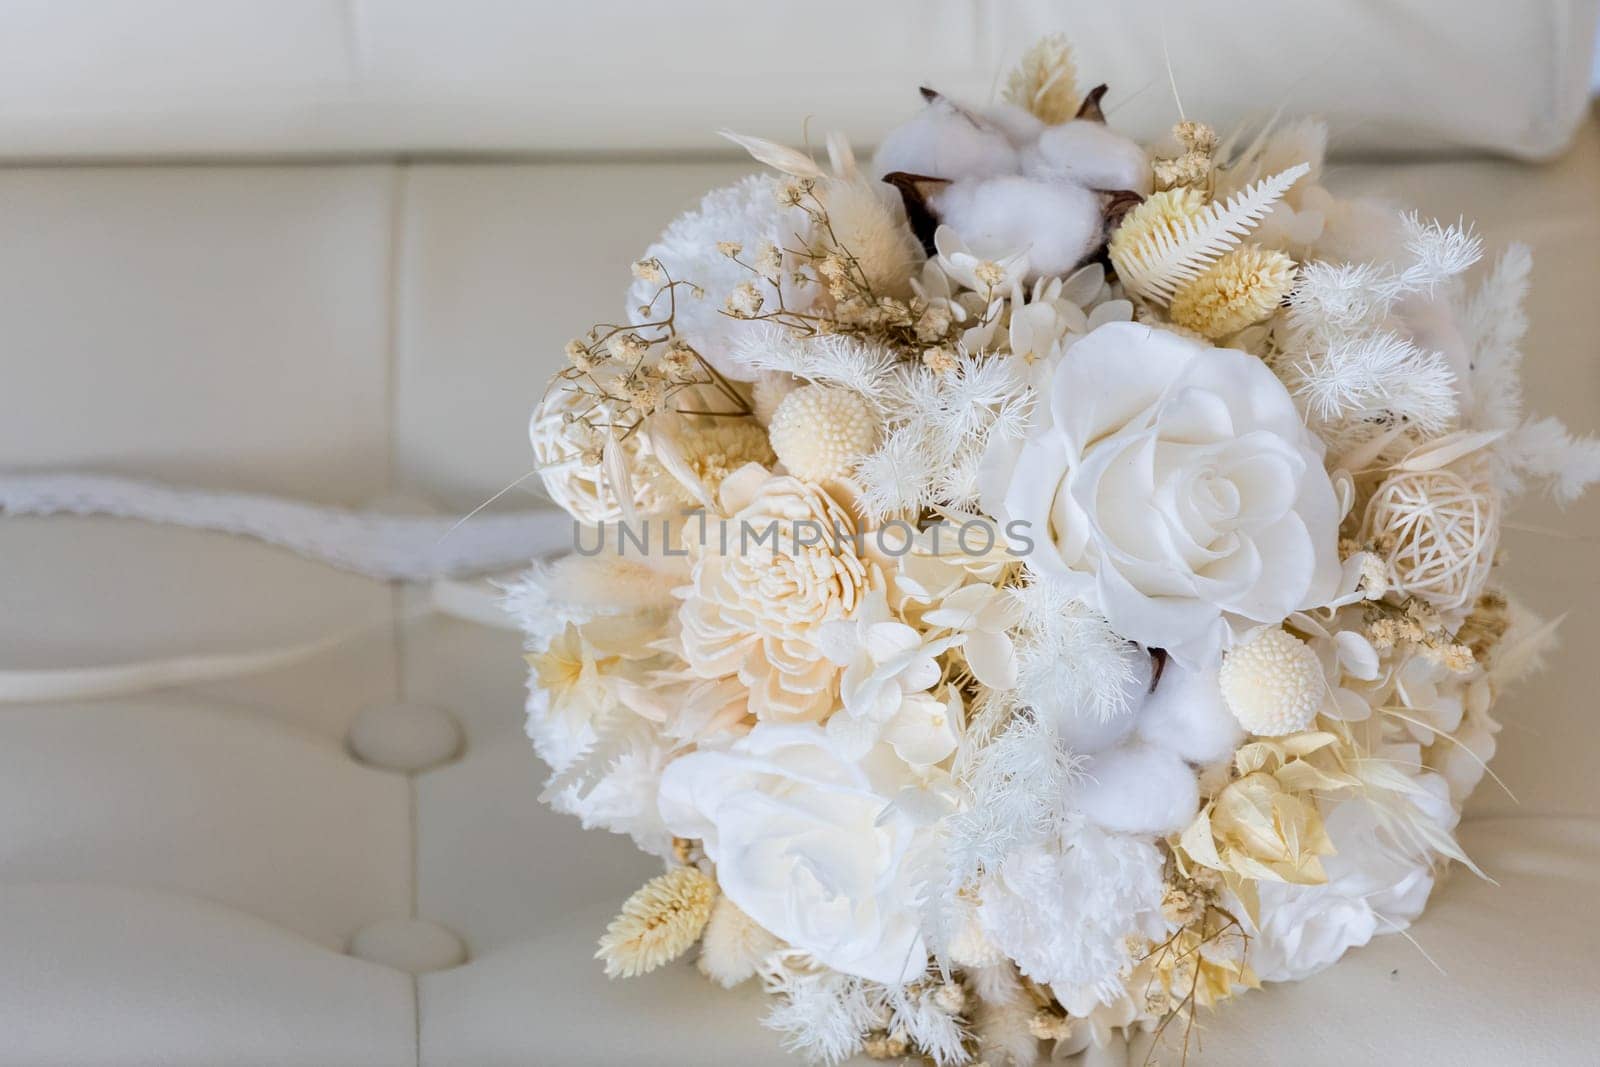 A tender bouquet of the bride in pastel colors on a leather sofa.